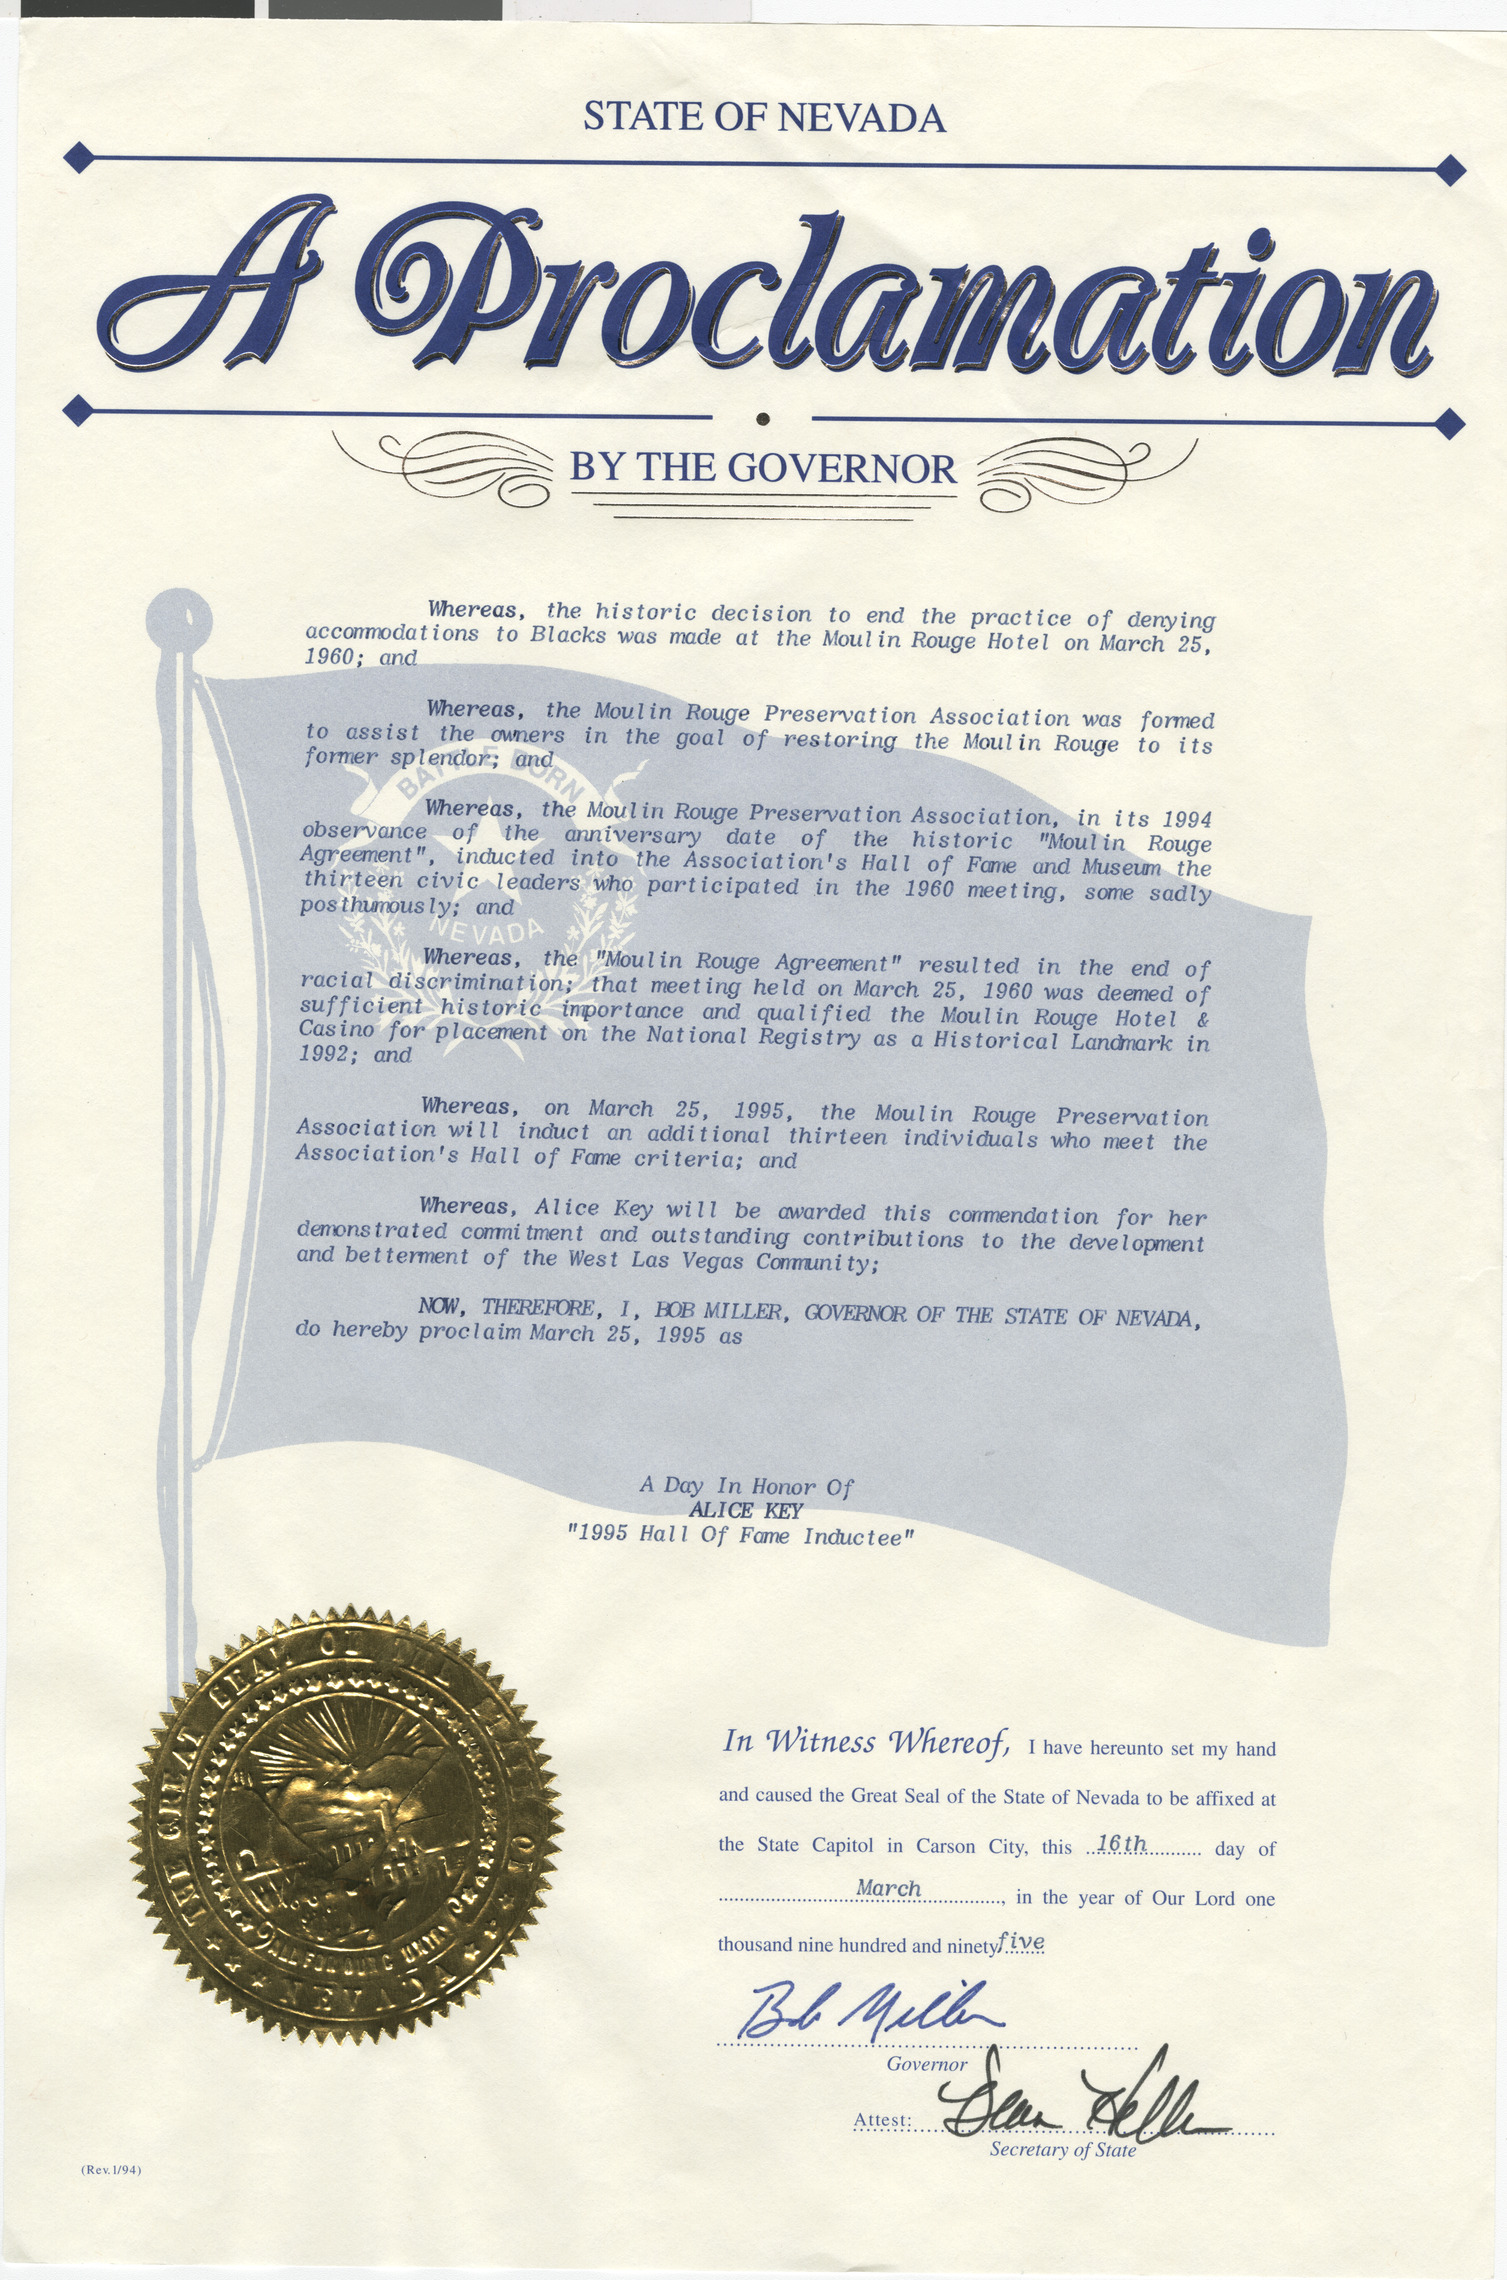 Proclamation from Nevada Governor for A Day in Honor of Alice Key, signed March 16, 1995